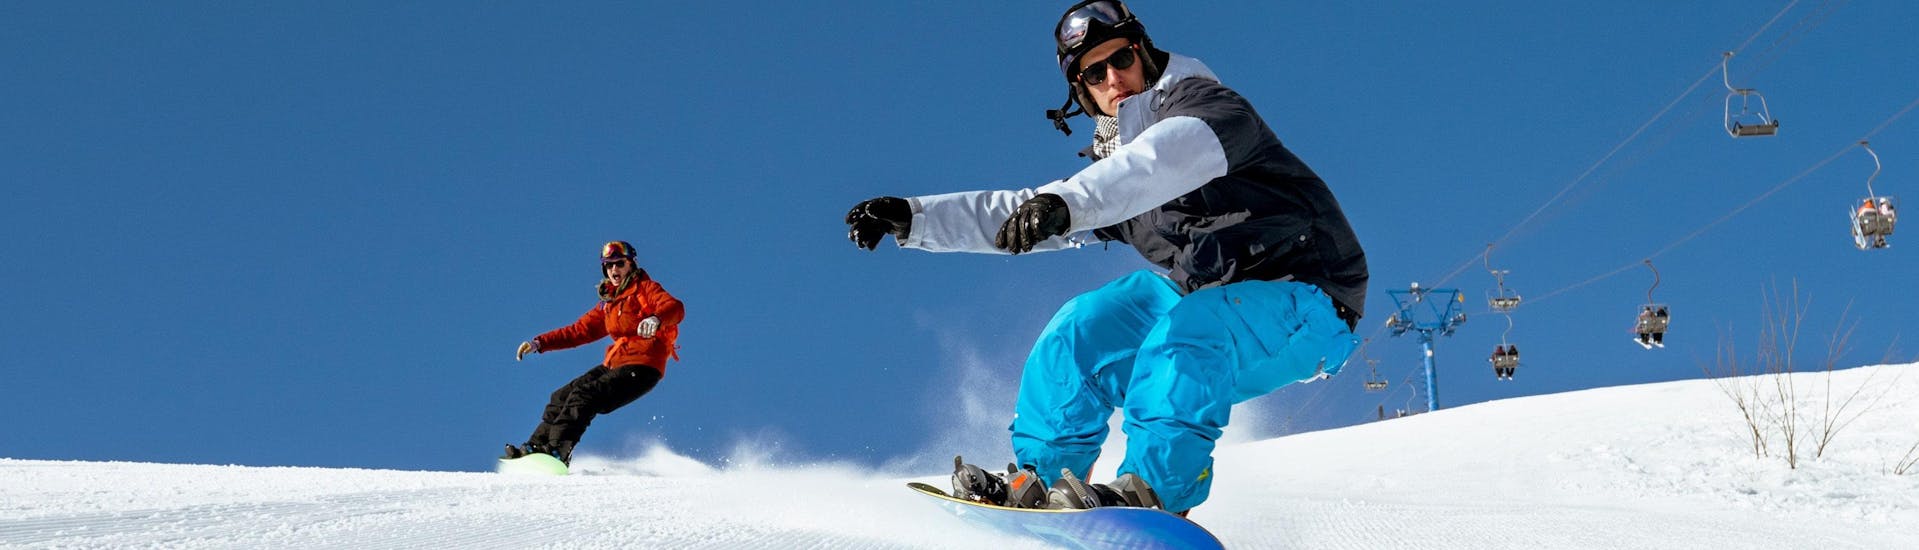 Two snowboarders are racing down a freshly prepared slope during their snowboarding lessons.